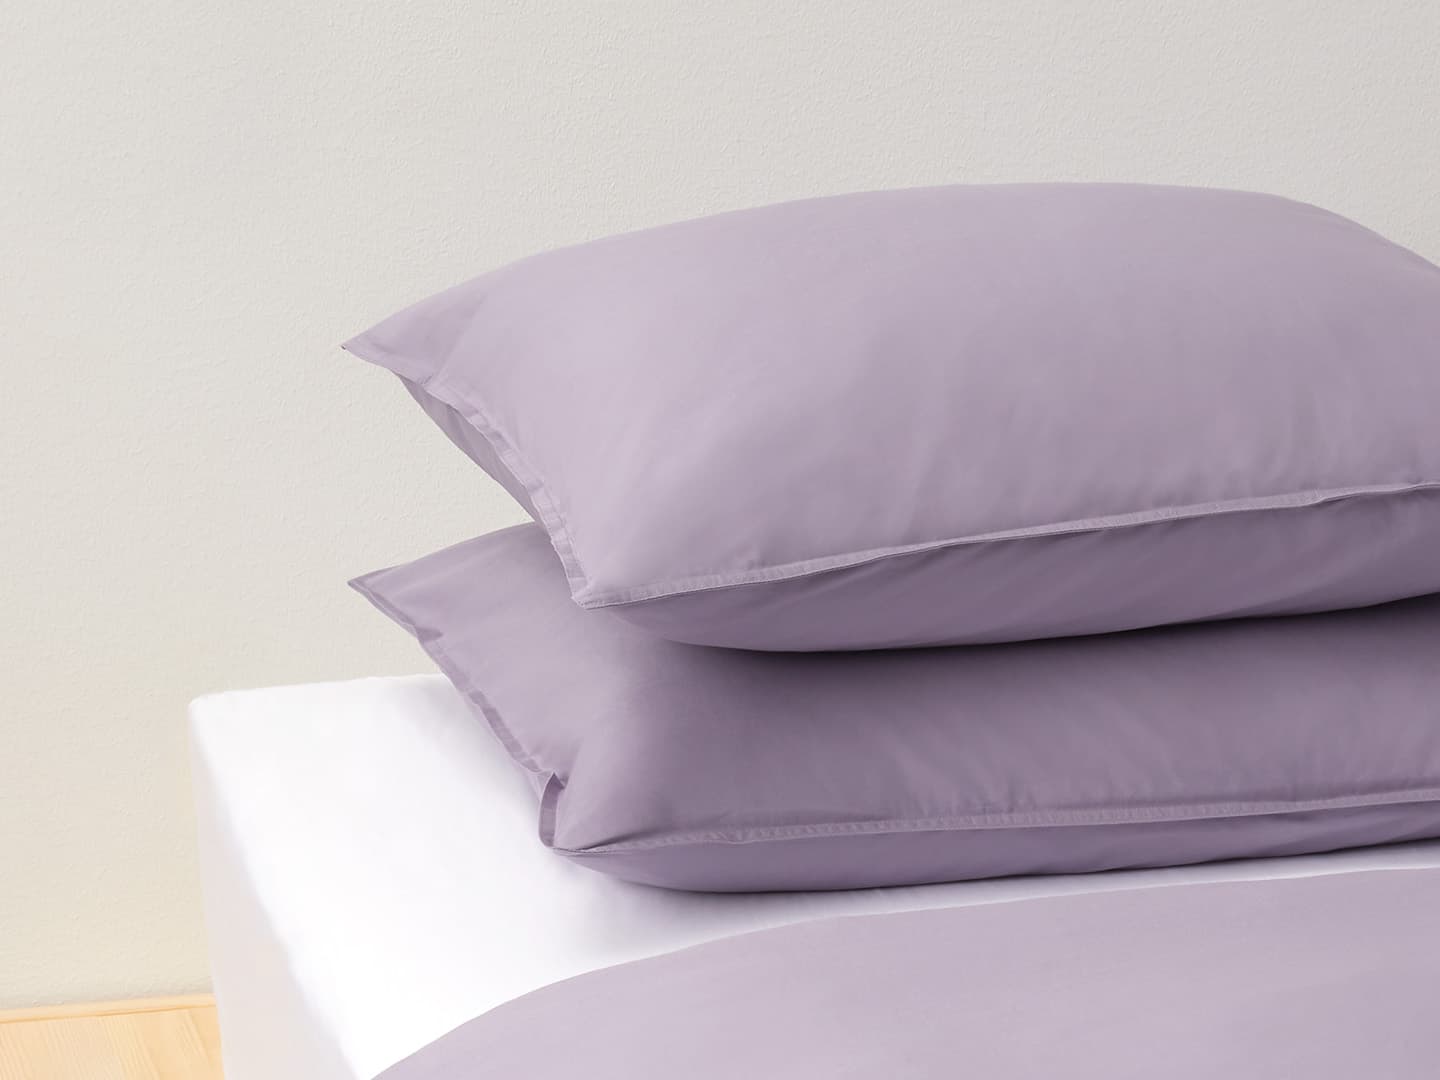 Pillowcase Nejd - Dusty Lilac in the group Bedding / Pillowcases at A L V A (1149)